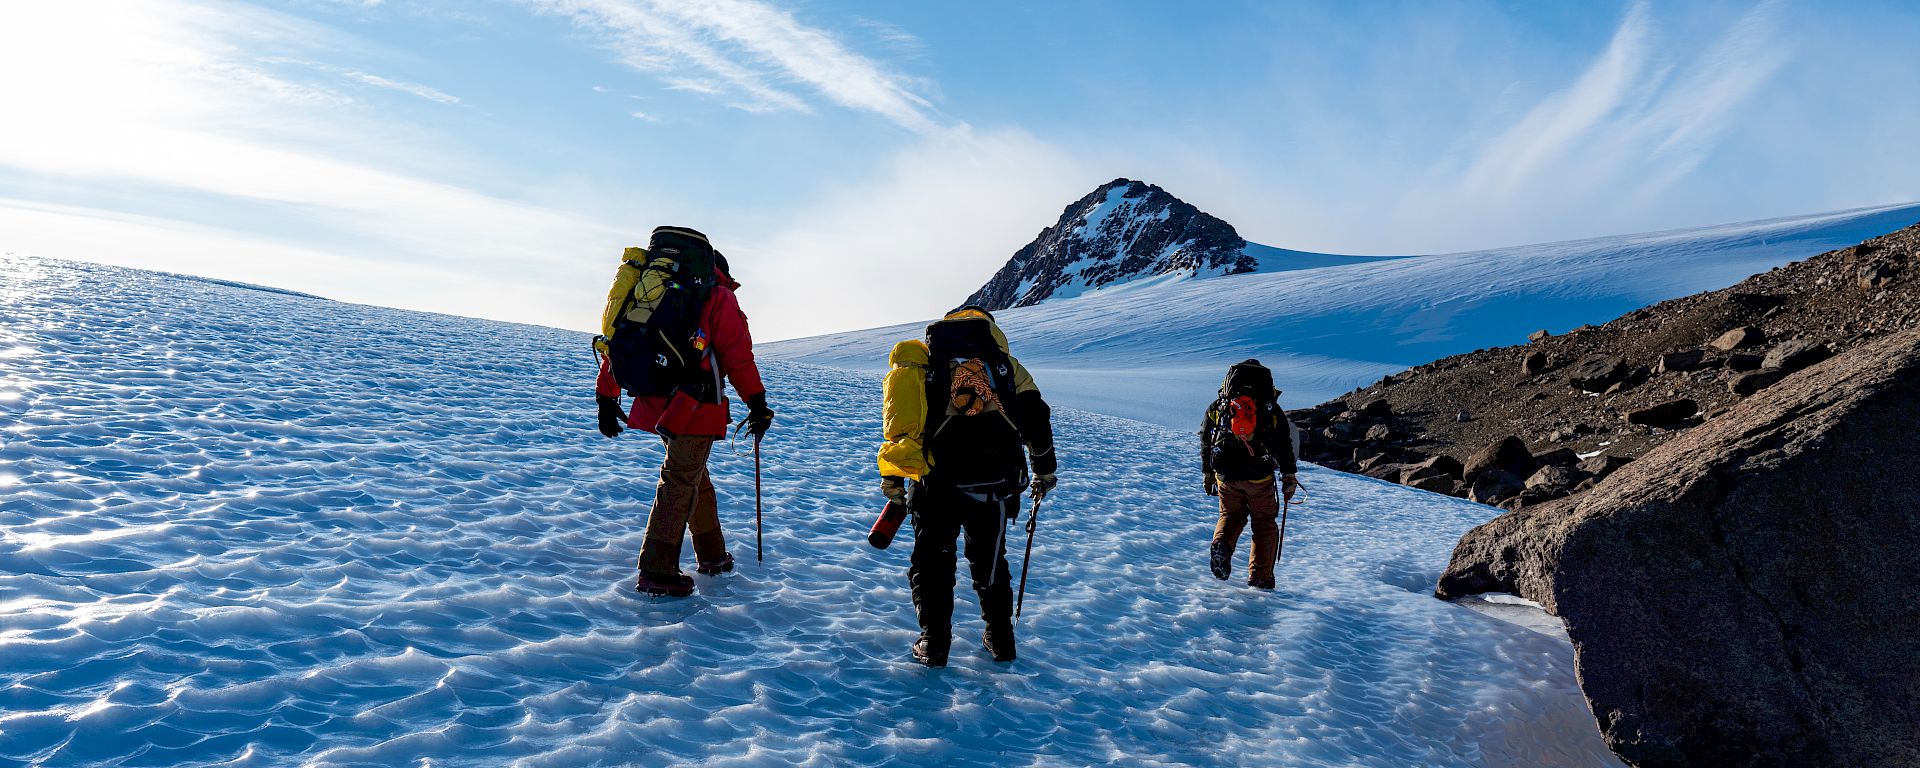 Expeditioners walk through a dramatic, mountainous landscape. Rocky mountains rise out of an icy plain.